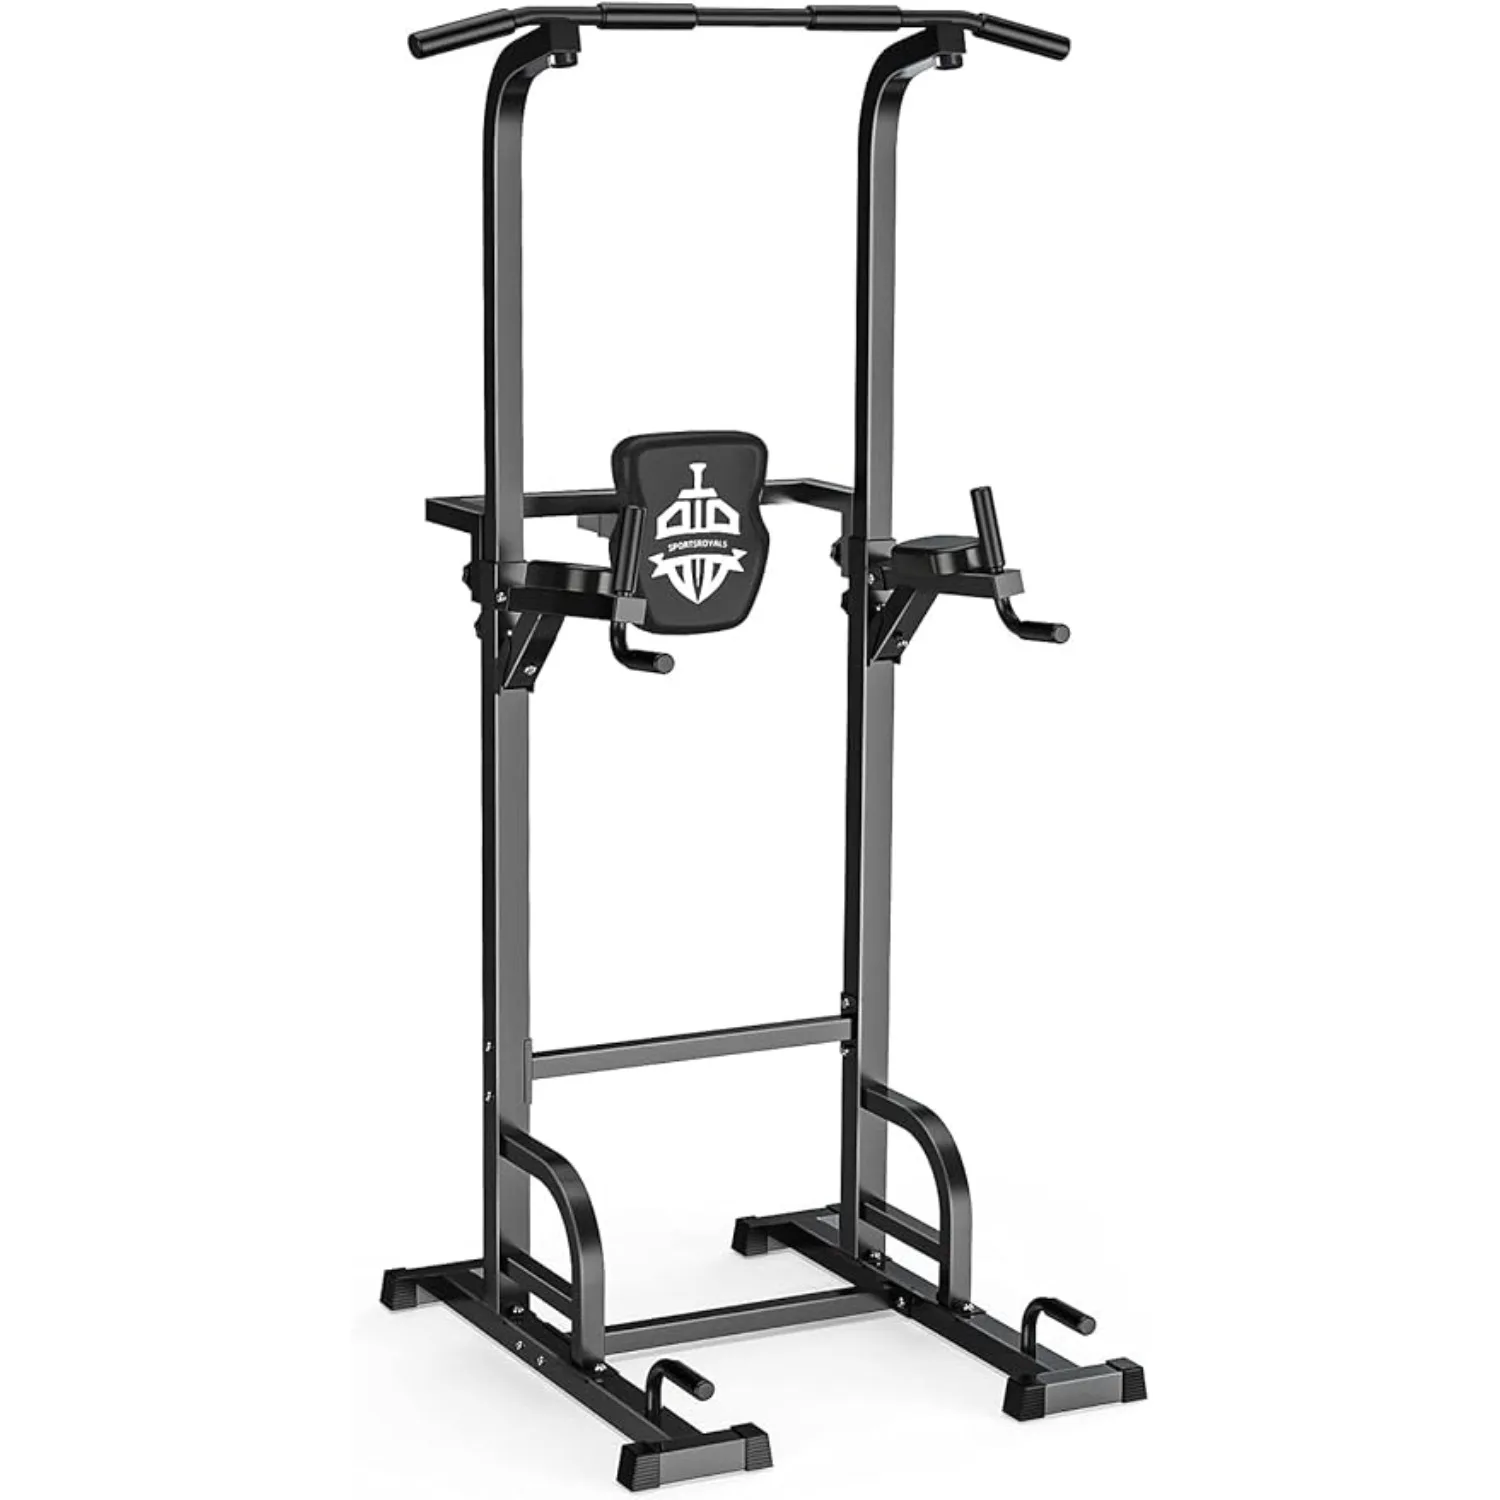 

Power Tower Pull Up Dip Station Assistive Trainer Multi-Function Home Gym Strength Training Fitness Equipment 440LBS